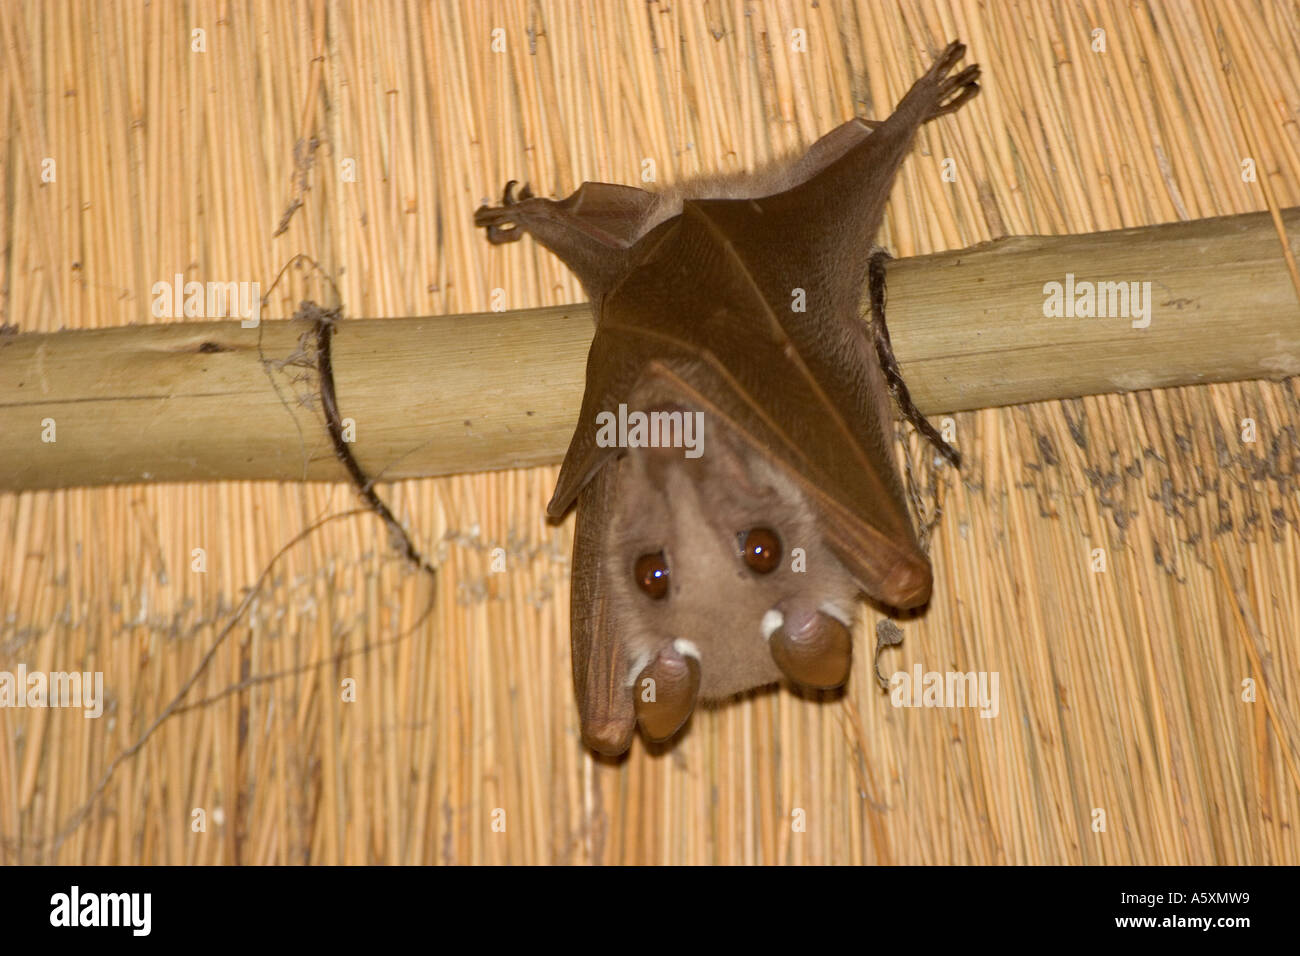 BA-176D   FRUIT BAT HANGING FROM CEILING Stock Photo